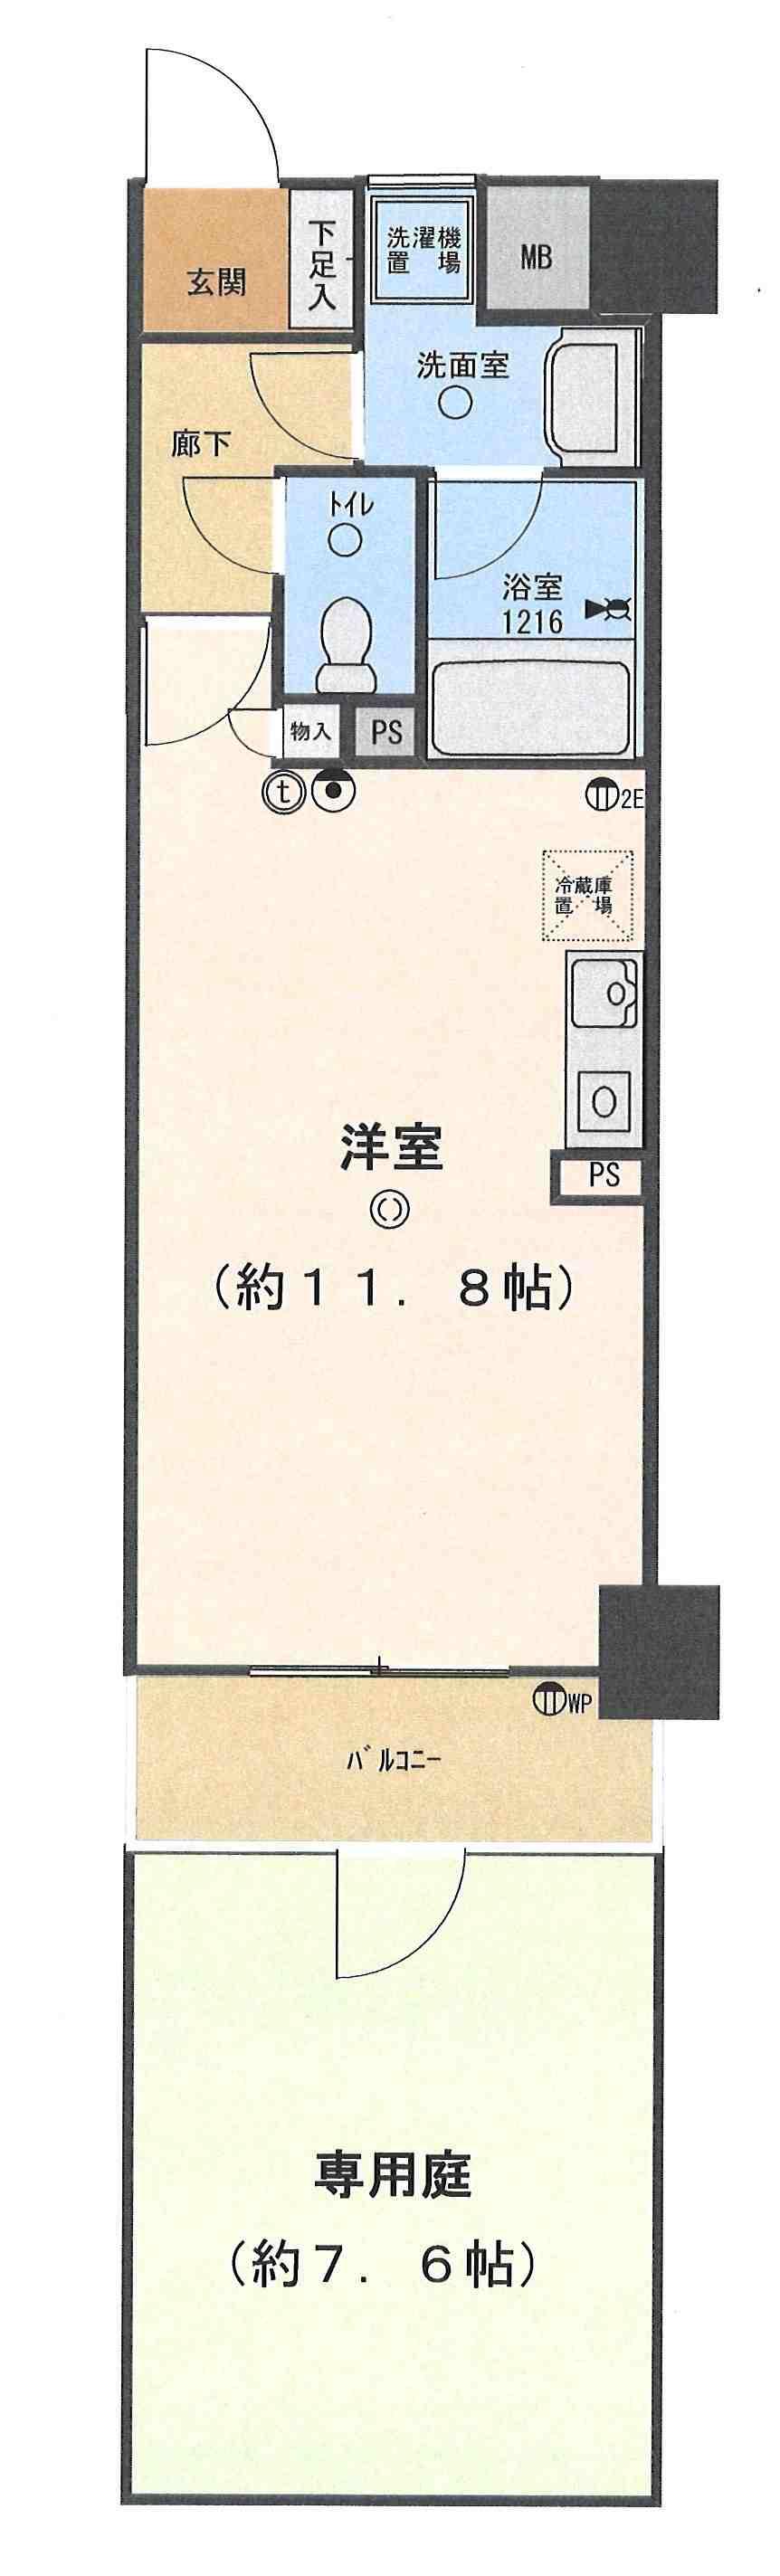 Floor plan. Price 14.2 million yen, Occupied area 30.03 sq m , Balcony area 3.63 sq m about 11.8 quires of Western-style ・ Bus toilet another 30 sq m more than ・ Southeast direction ・ Private garden about 7.6 Pledge with dwelling unit